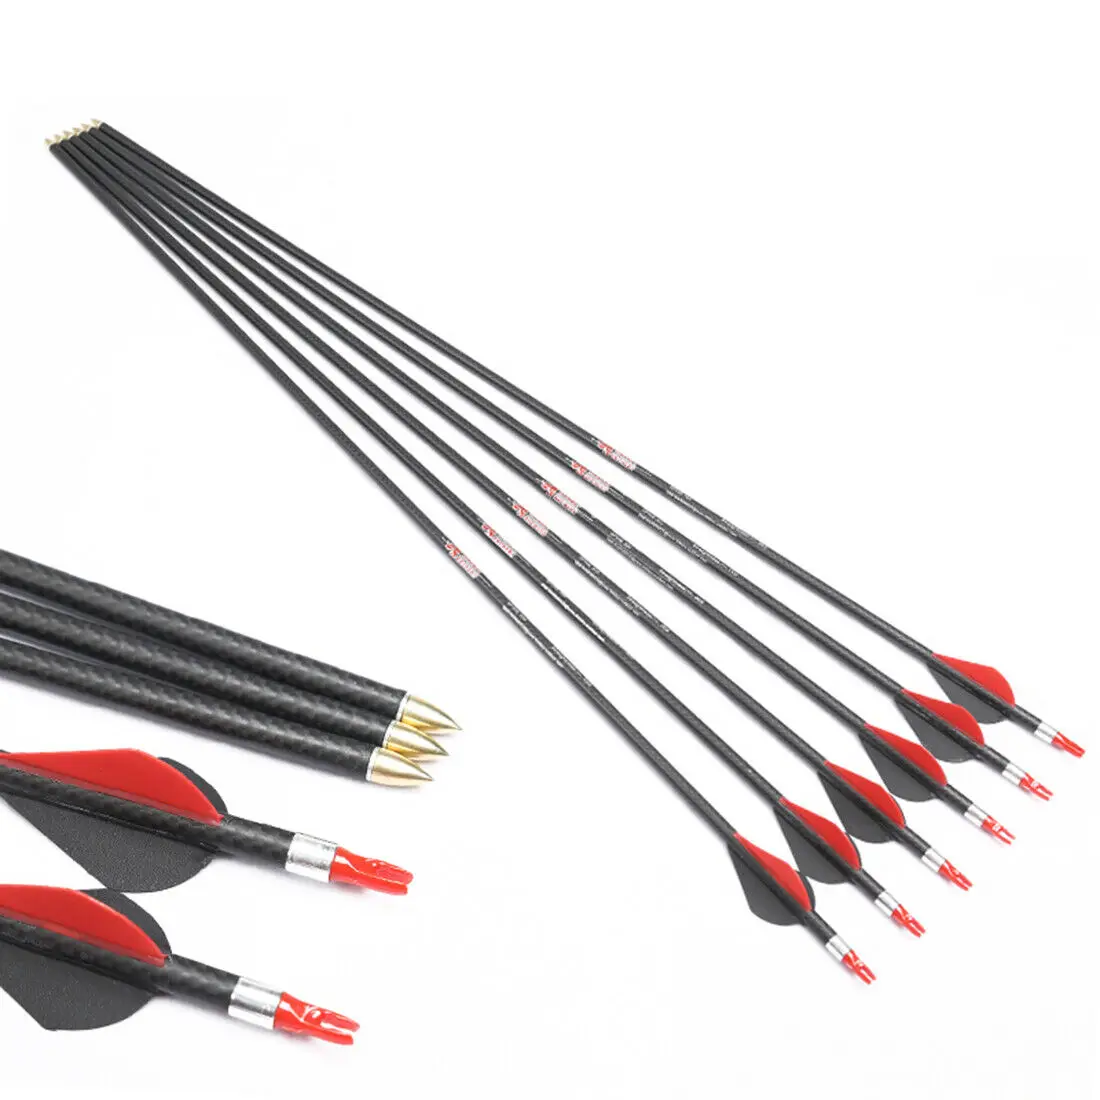 

6PCS Linkboy Archery 3k Carbon Arrow Spine250-600 32inch ID6.2mm 2inch Plastic Vanes Compound Bow Shooting